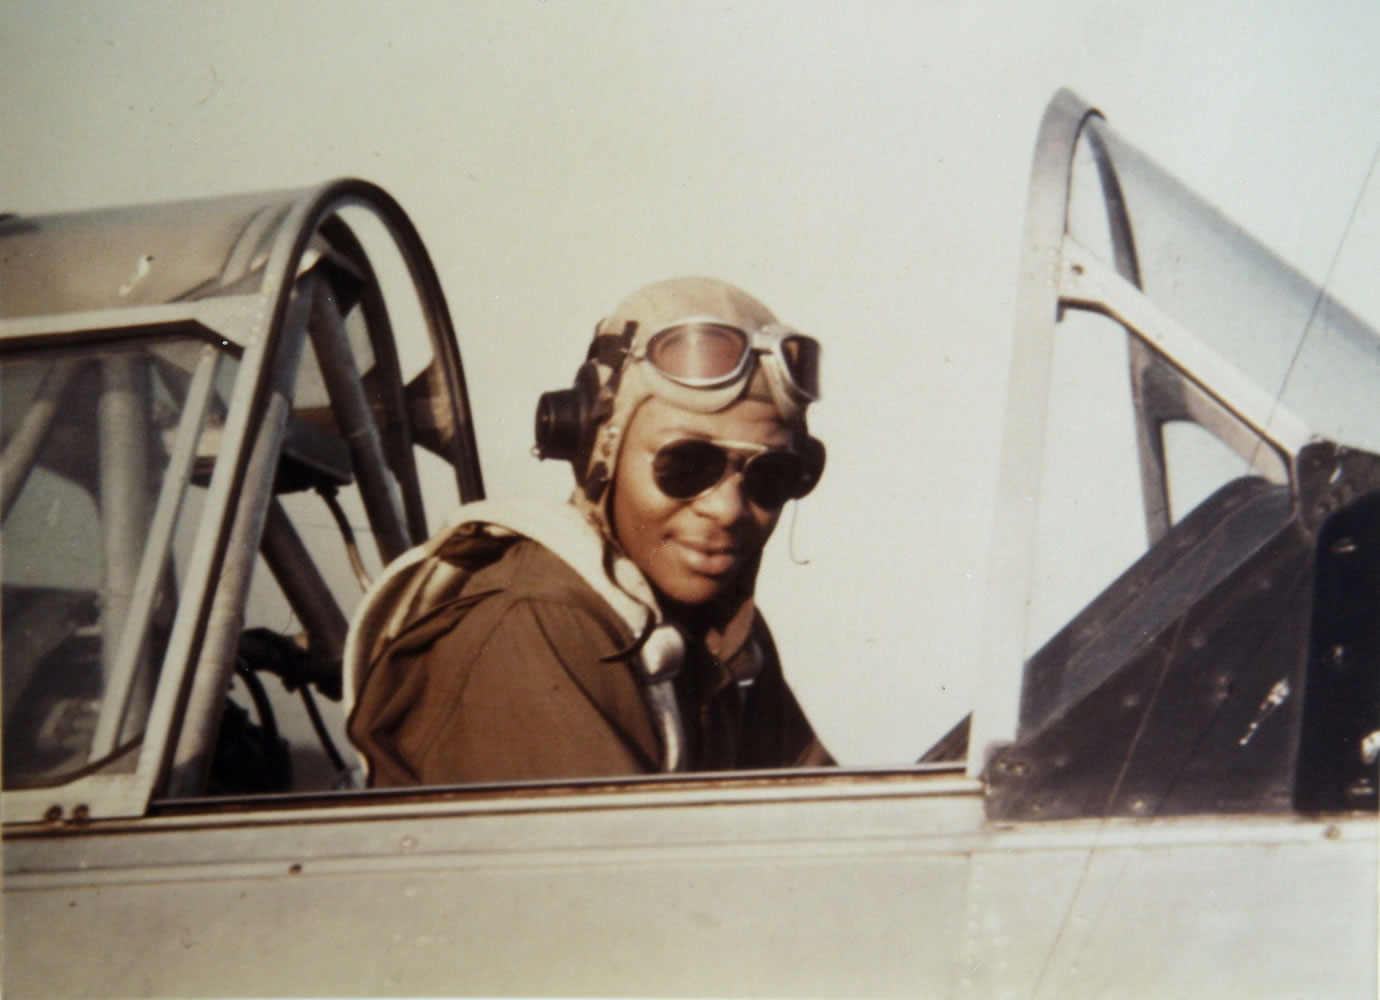 Tuskegee Airman George Hickman sits in the cockpit of an AT-6 trainer airplane in Tuskegee, Ala.